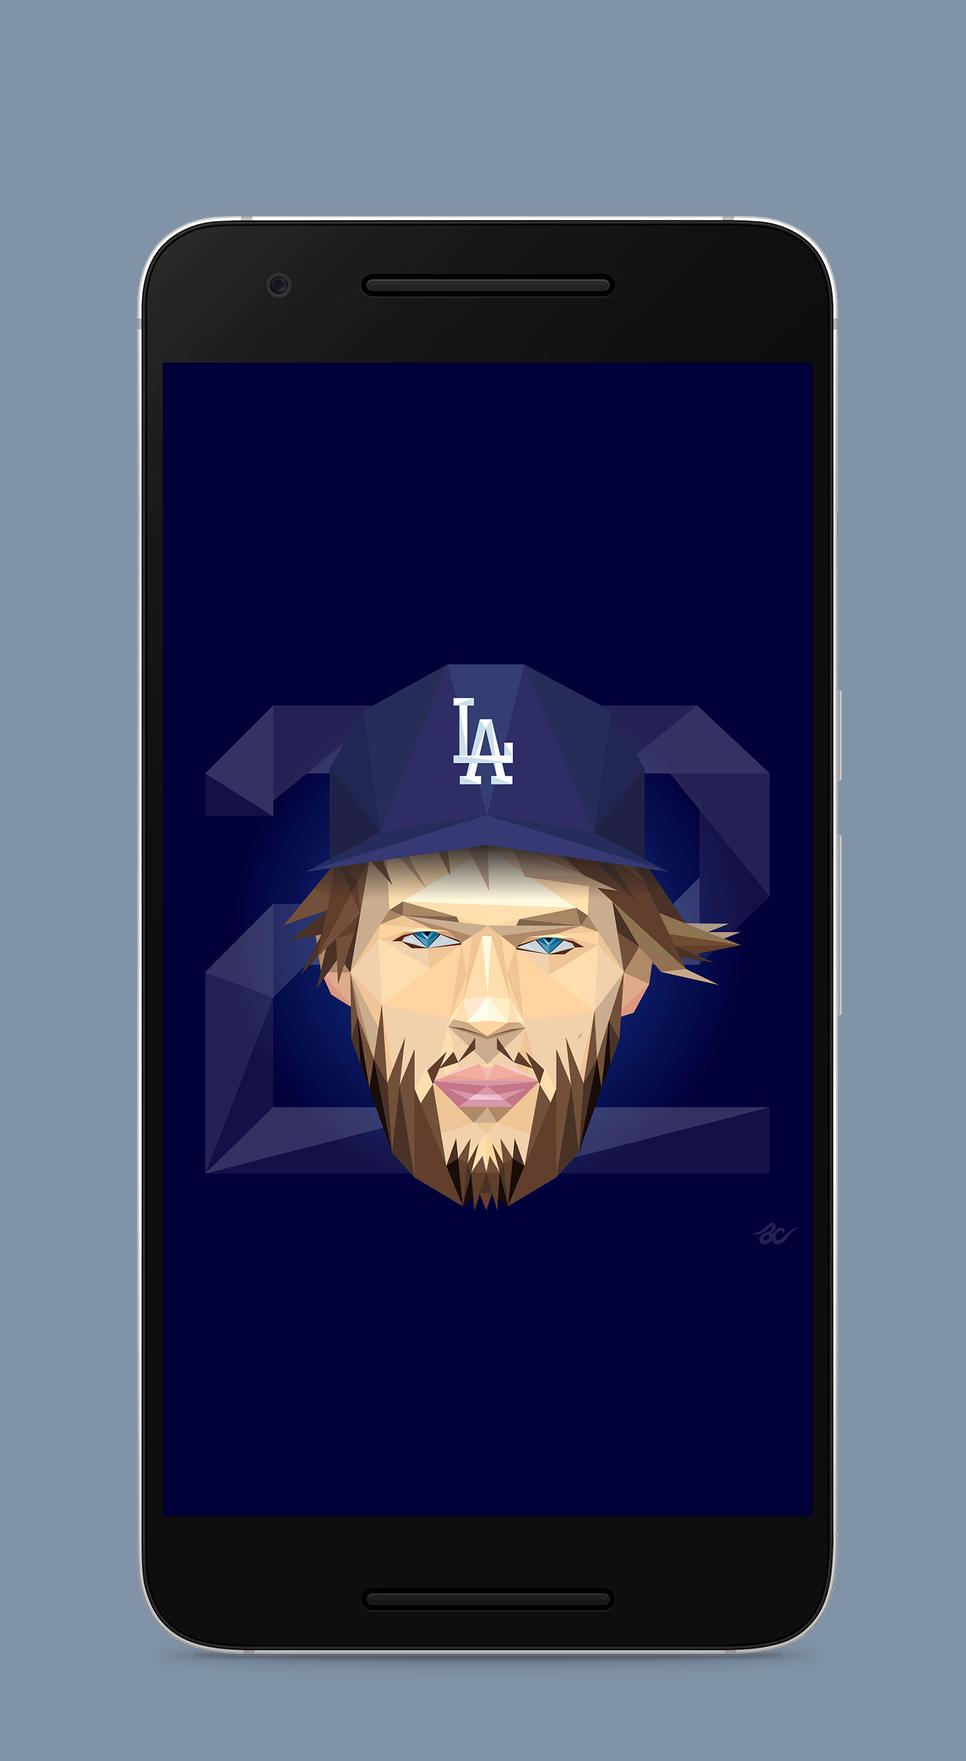 Clayton Kershaw Wallpaper Hd Mlb For Android Apk Download